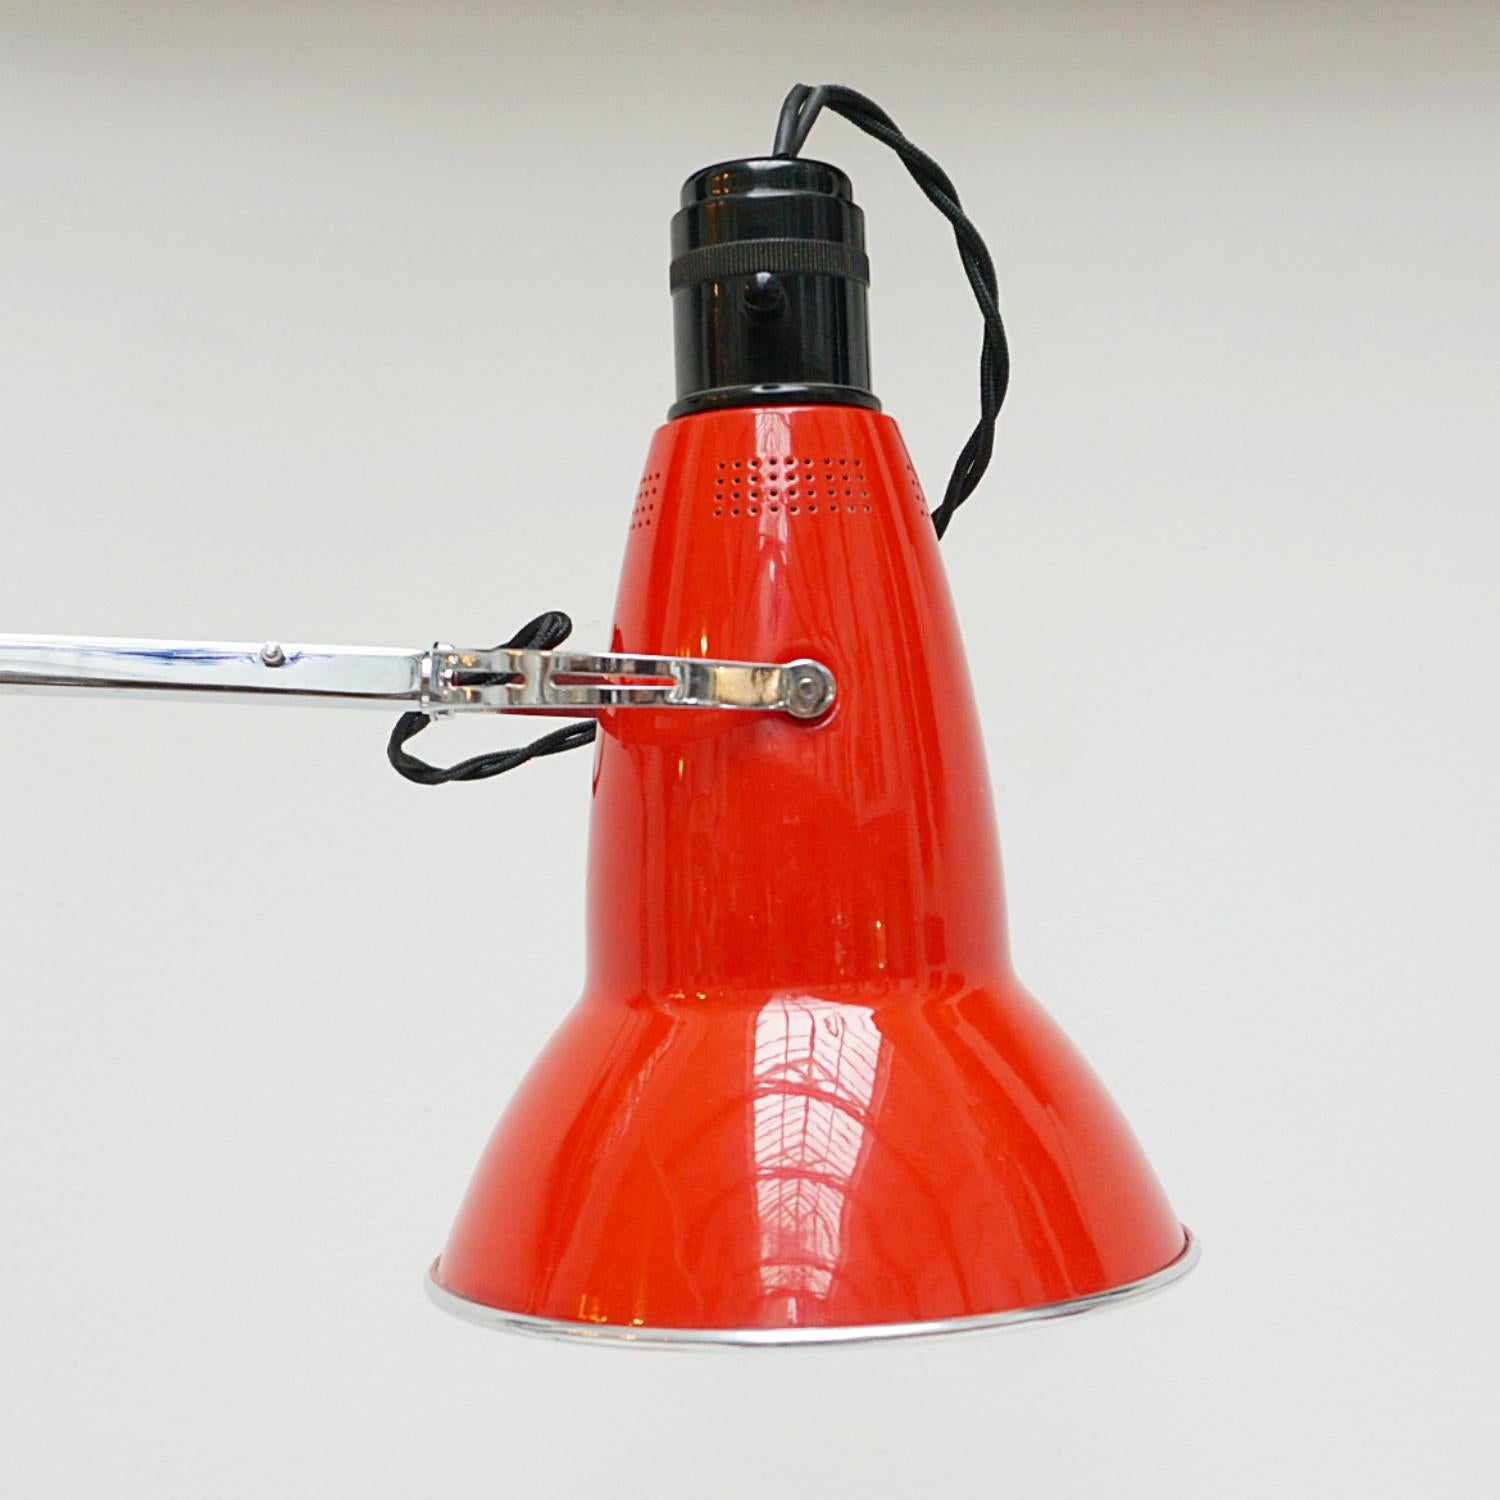 'Three-spring' 1930's prototype Anglepoise desk lamp by Herbert Terry & Sons. Chrome arm assembly with matching red two step base and perforated lamp shade. Original stamps to stem. The three spring Anglepoise lamp was first released by Herbert